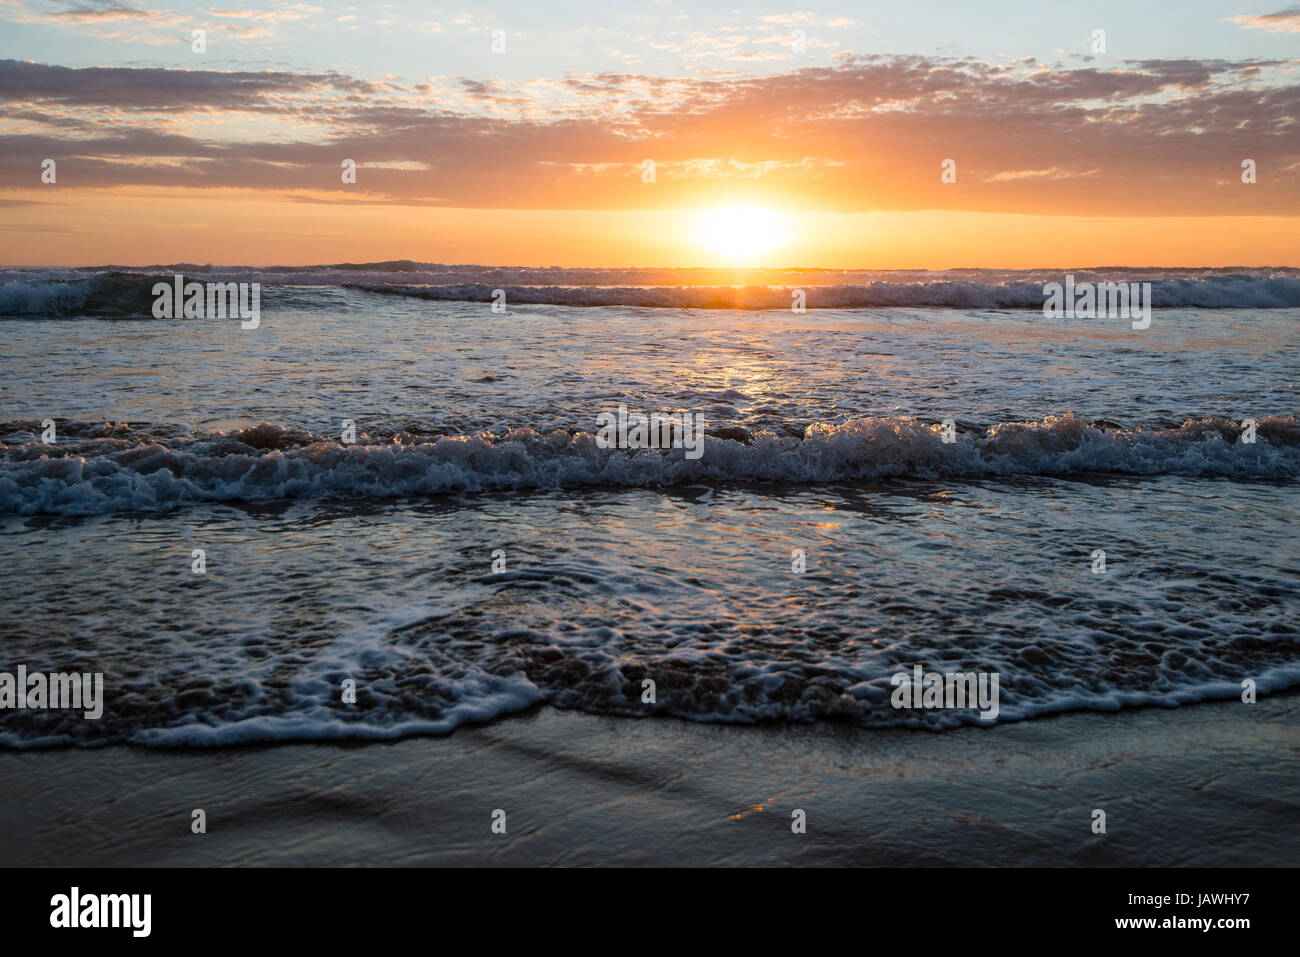 An incoming tide pushes waves onto a beach at sunset. Stock Photo